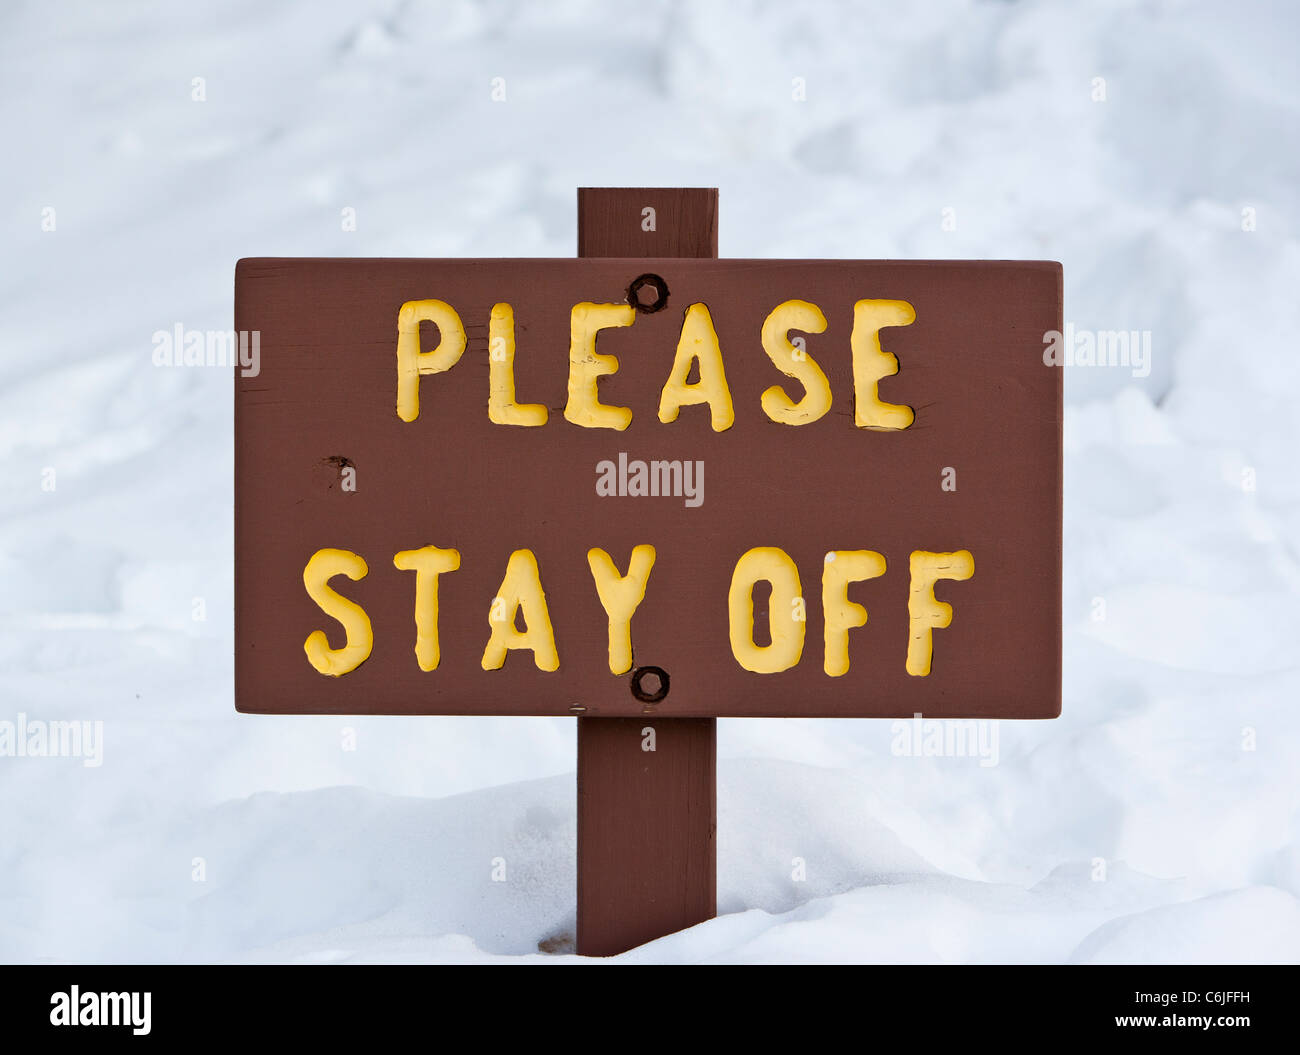 Please stay off sign stuck in snow, Grand Canyon, Arizona, USA